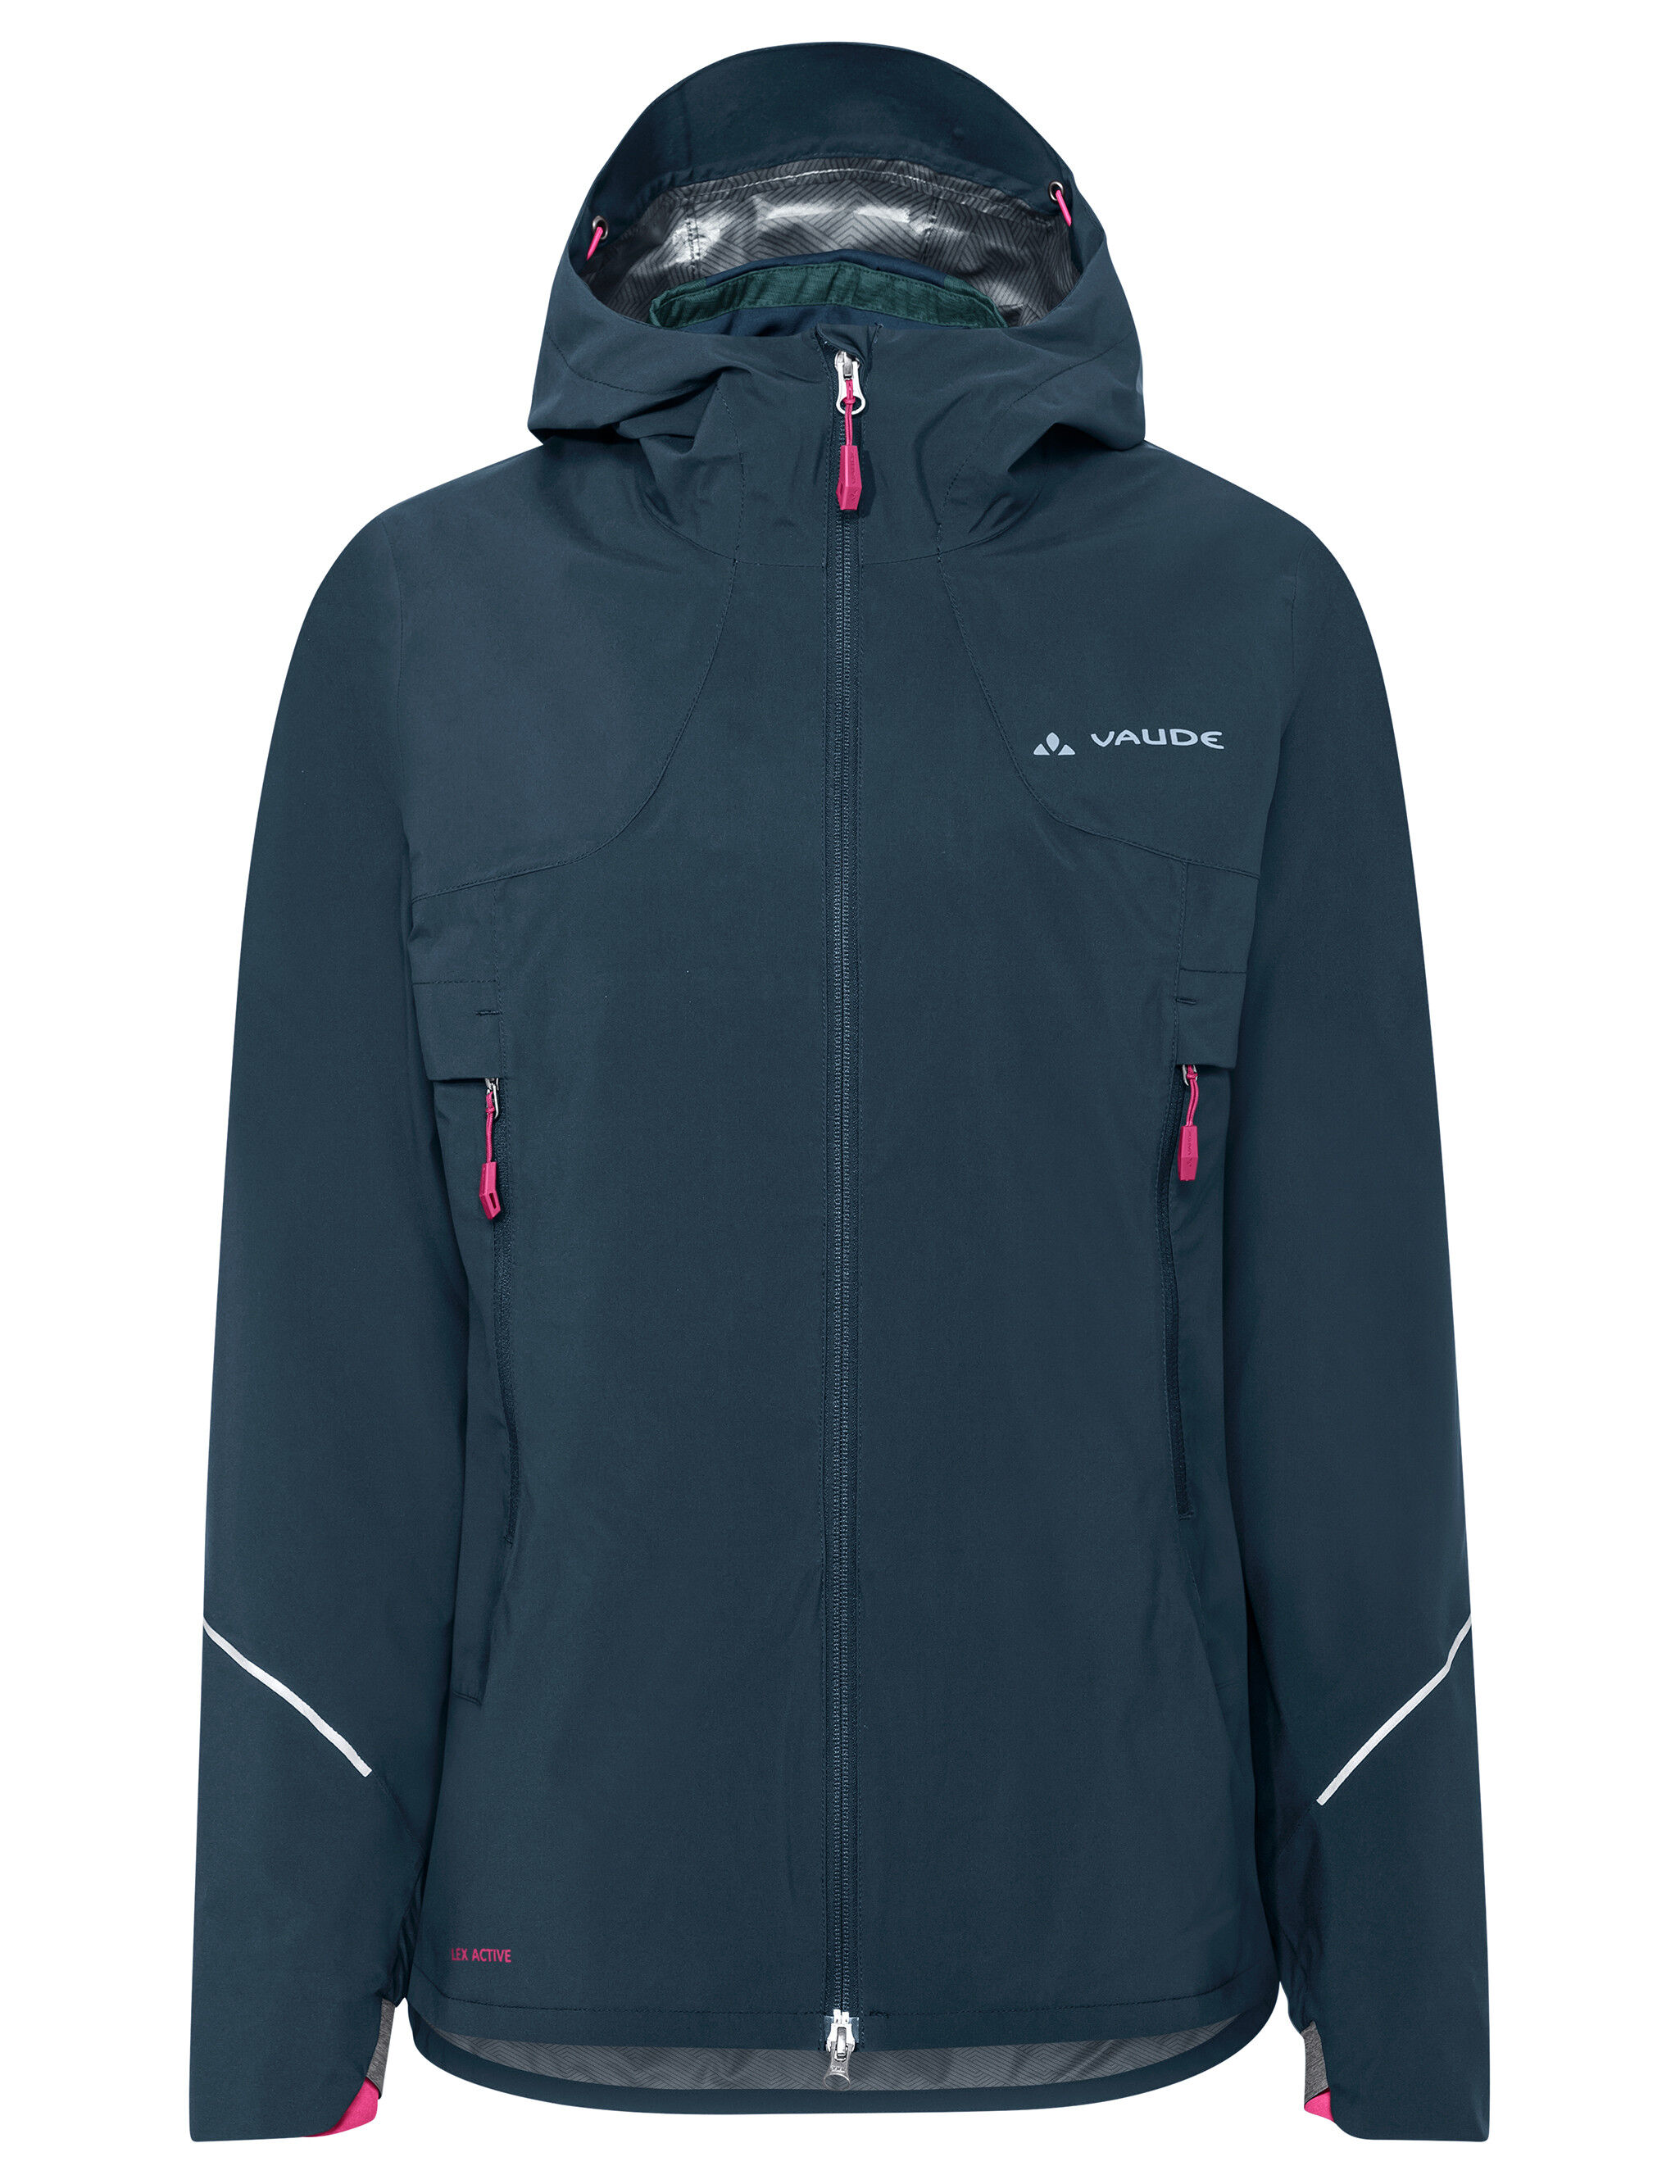 Vaude Yaras 3in1 Jacket - Giacca ciclismo - Donna